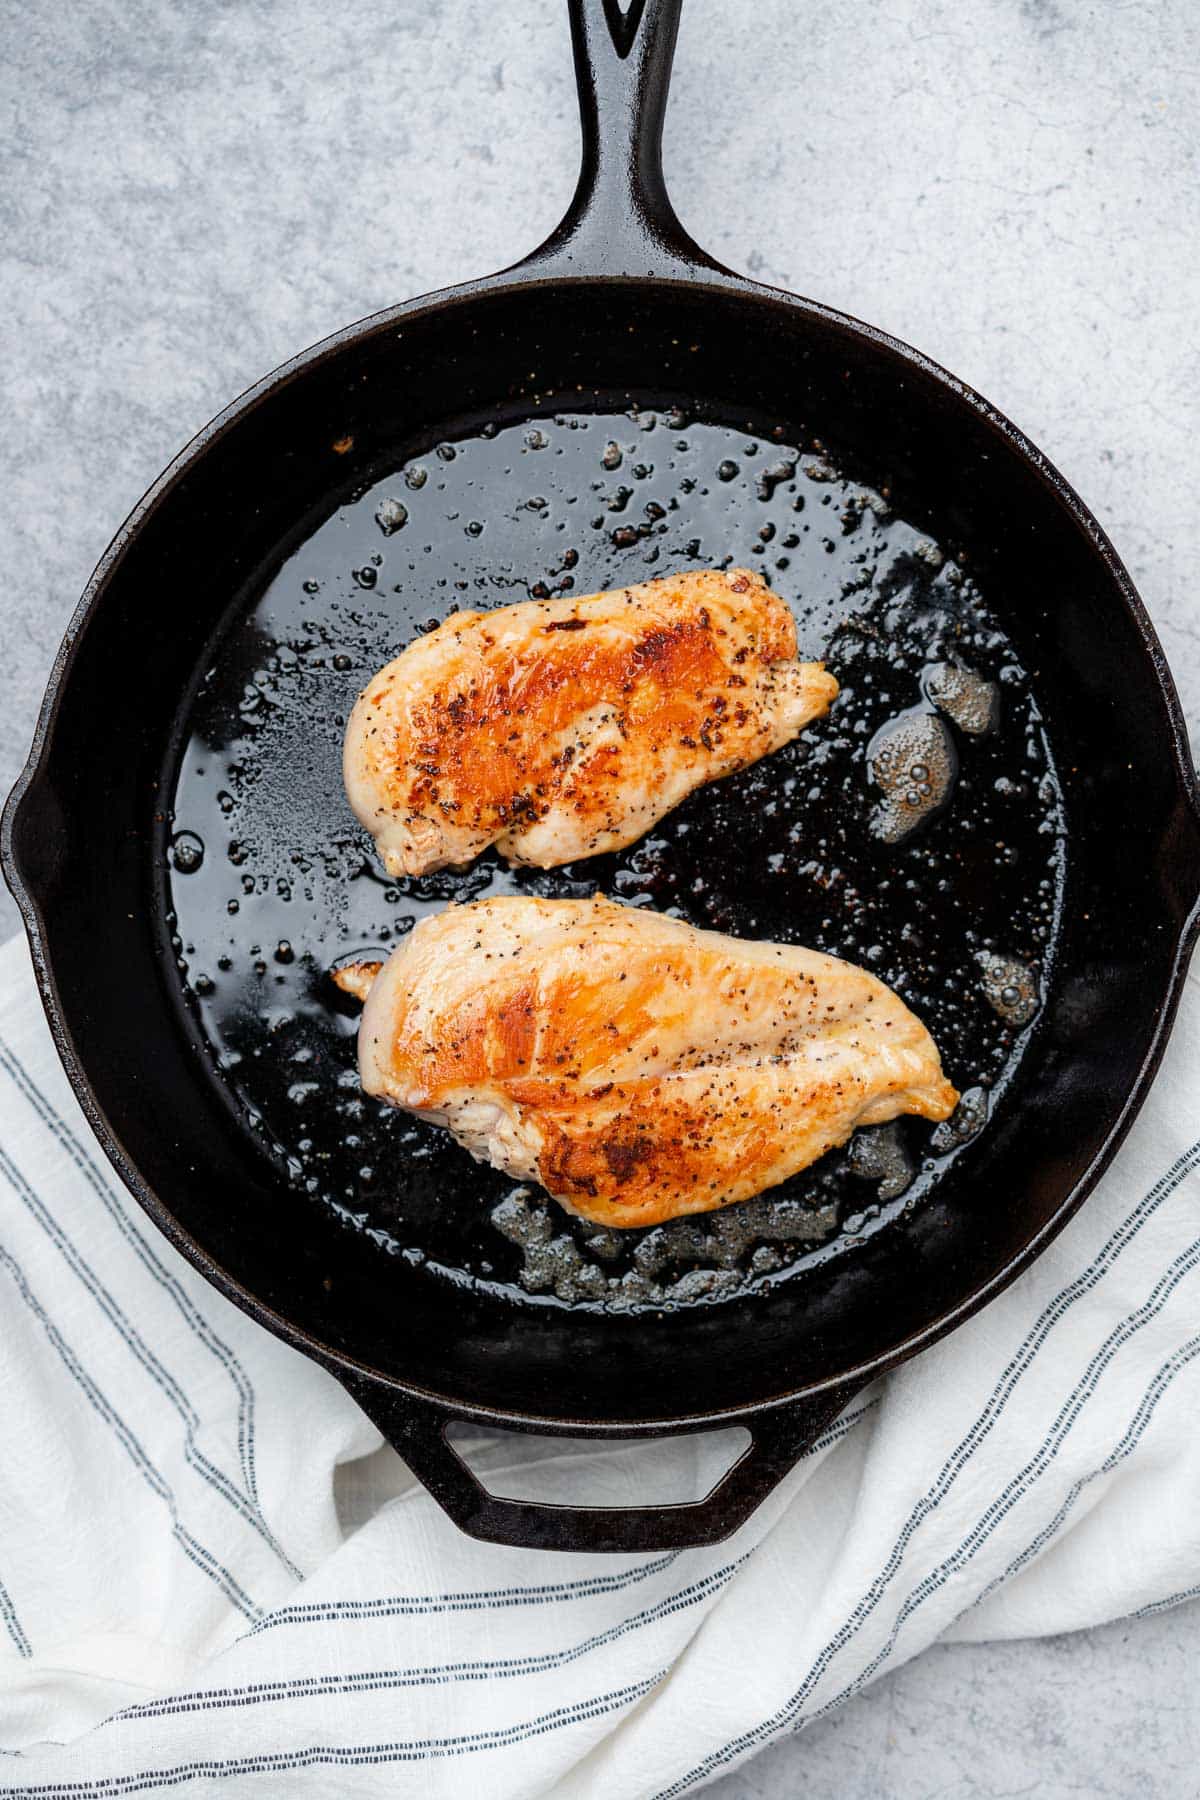 chicken searing in a cast iron skillet